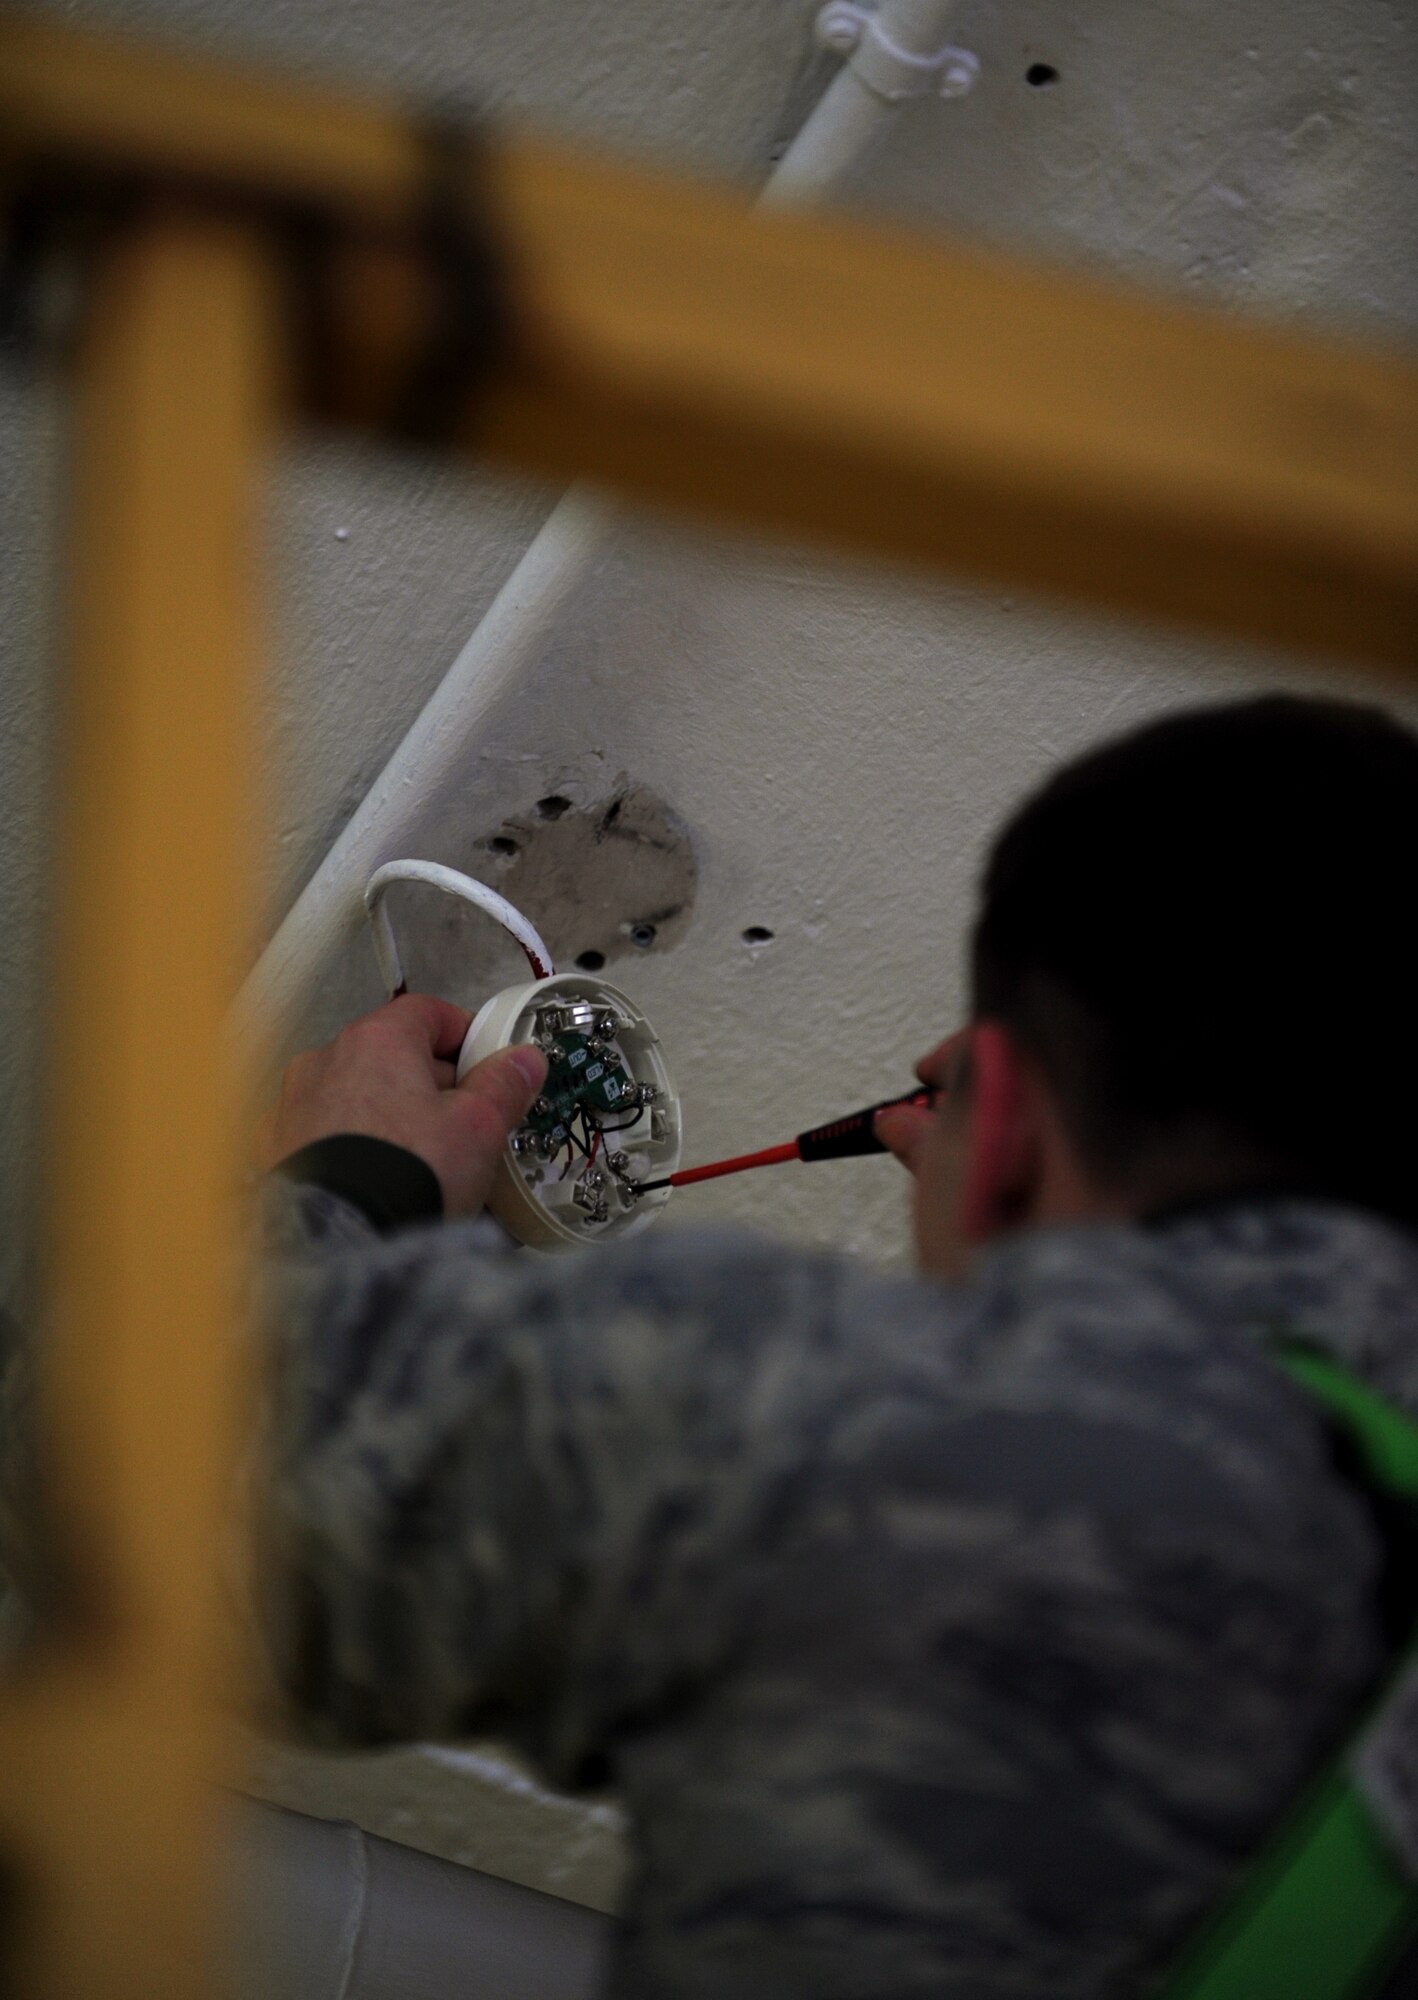 SPANGDAHLEM AIR BASE, Germany – Airman 1st Class Troy Heirling, 52nd Civil Engineer Squadron electrical-systems apprentice, removes a damaged fire detector in bldg 189 here Nov. 28. The alarm shop is responsible for maintaining, replacing and monitoring all base security and fire-alarm systems. (U.S. Air Force photo/Airman 1st Class Matthew B. Fredericks)